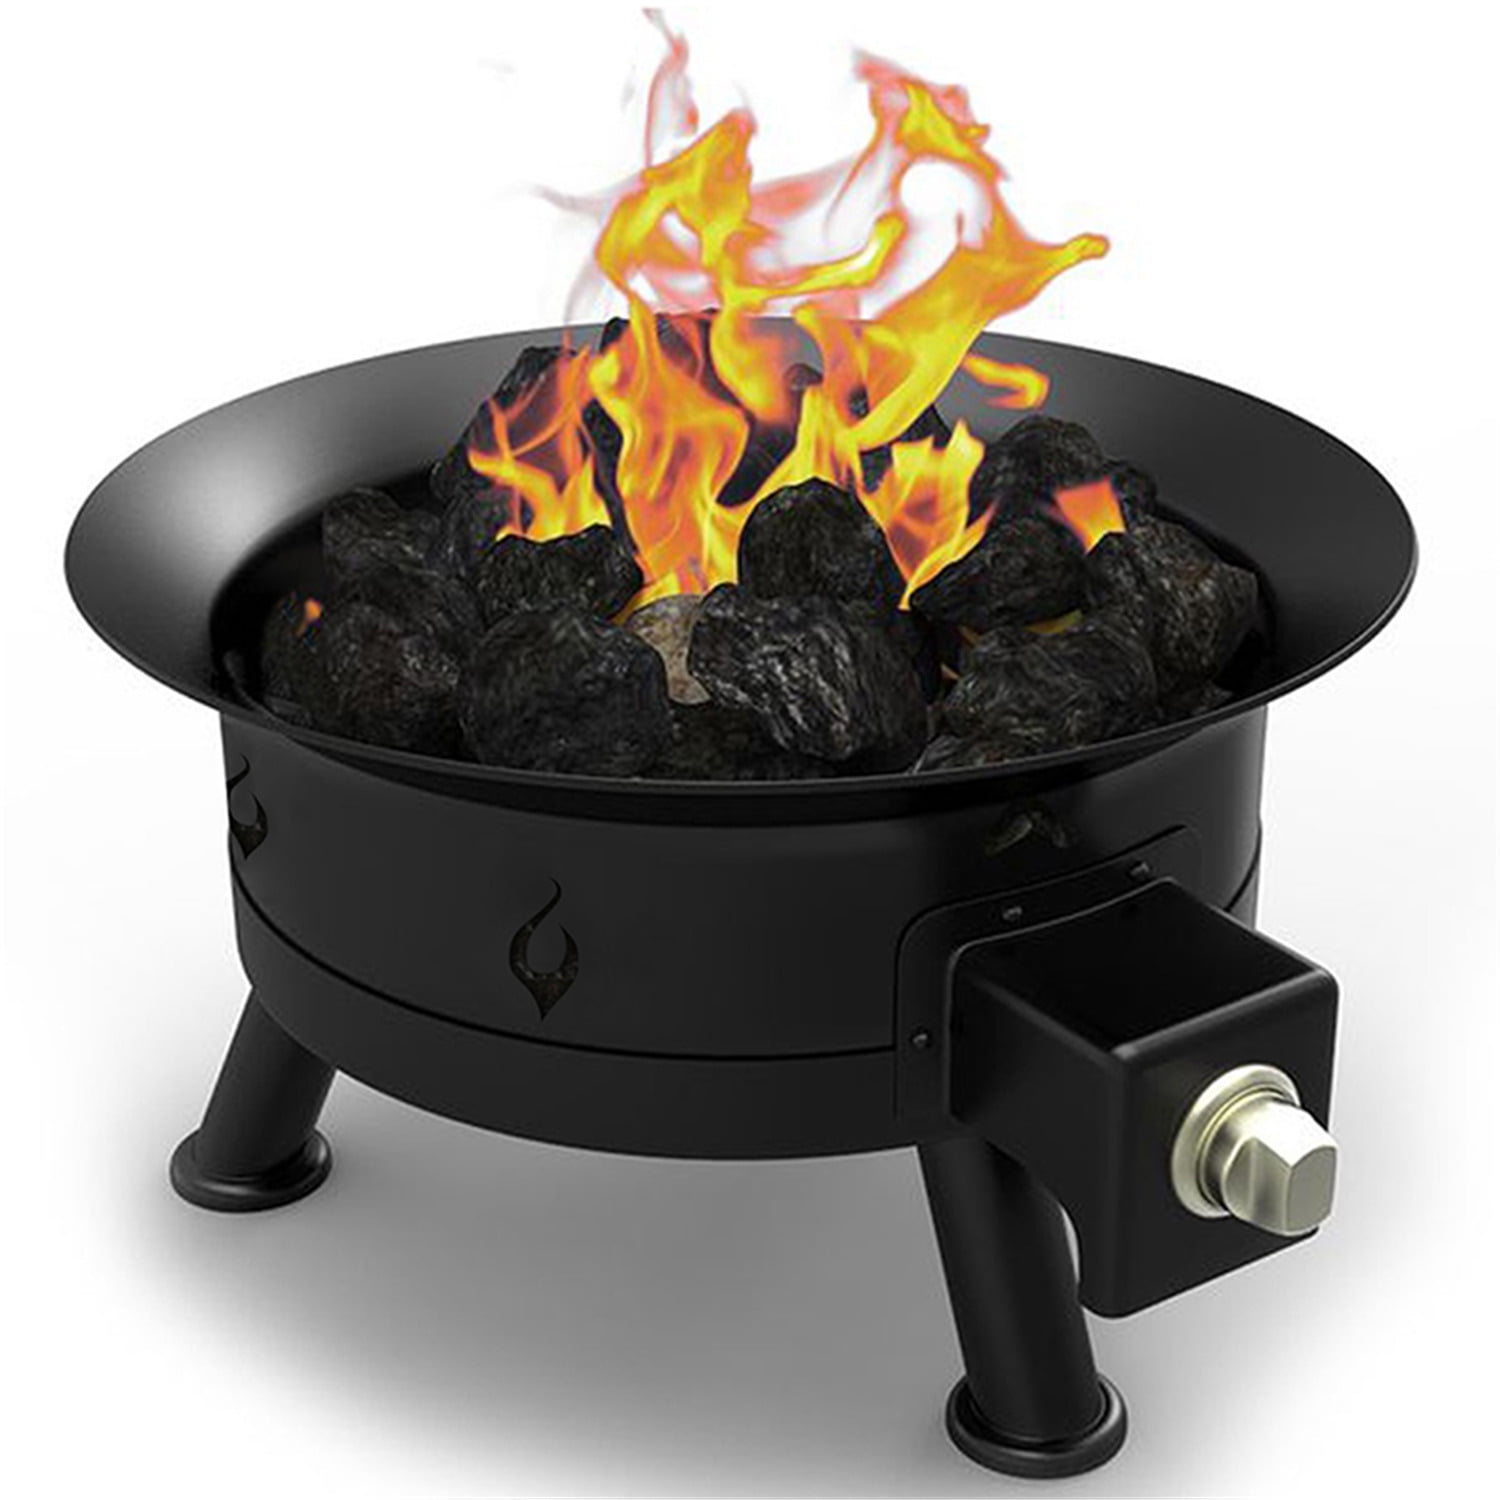 Regal Flame 24-inch Camp Mate 58,000 BTU Portable Propane Outdoor Fire Pit,  Perfect for RV, Camping, and Outdoor Fireplace. No Need for Firewood Racks,  Covers, Fire Rings, Gas, Logs, Firebowl - Walmart.com